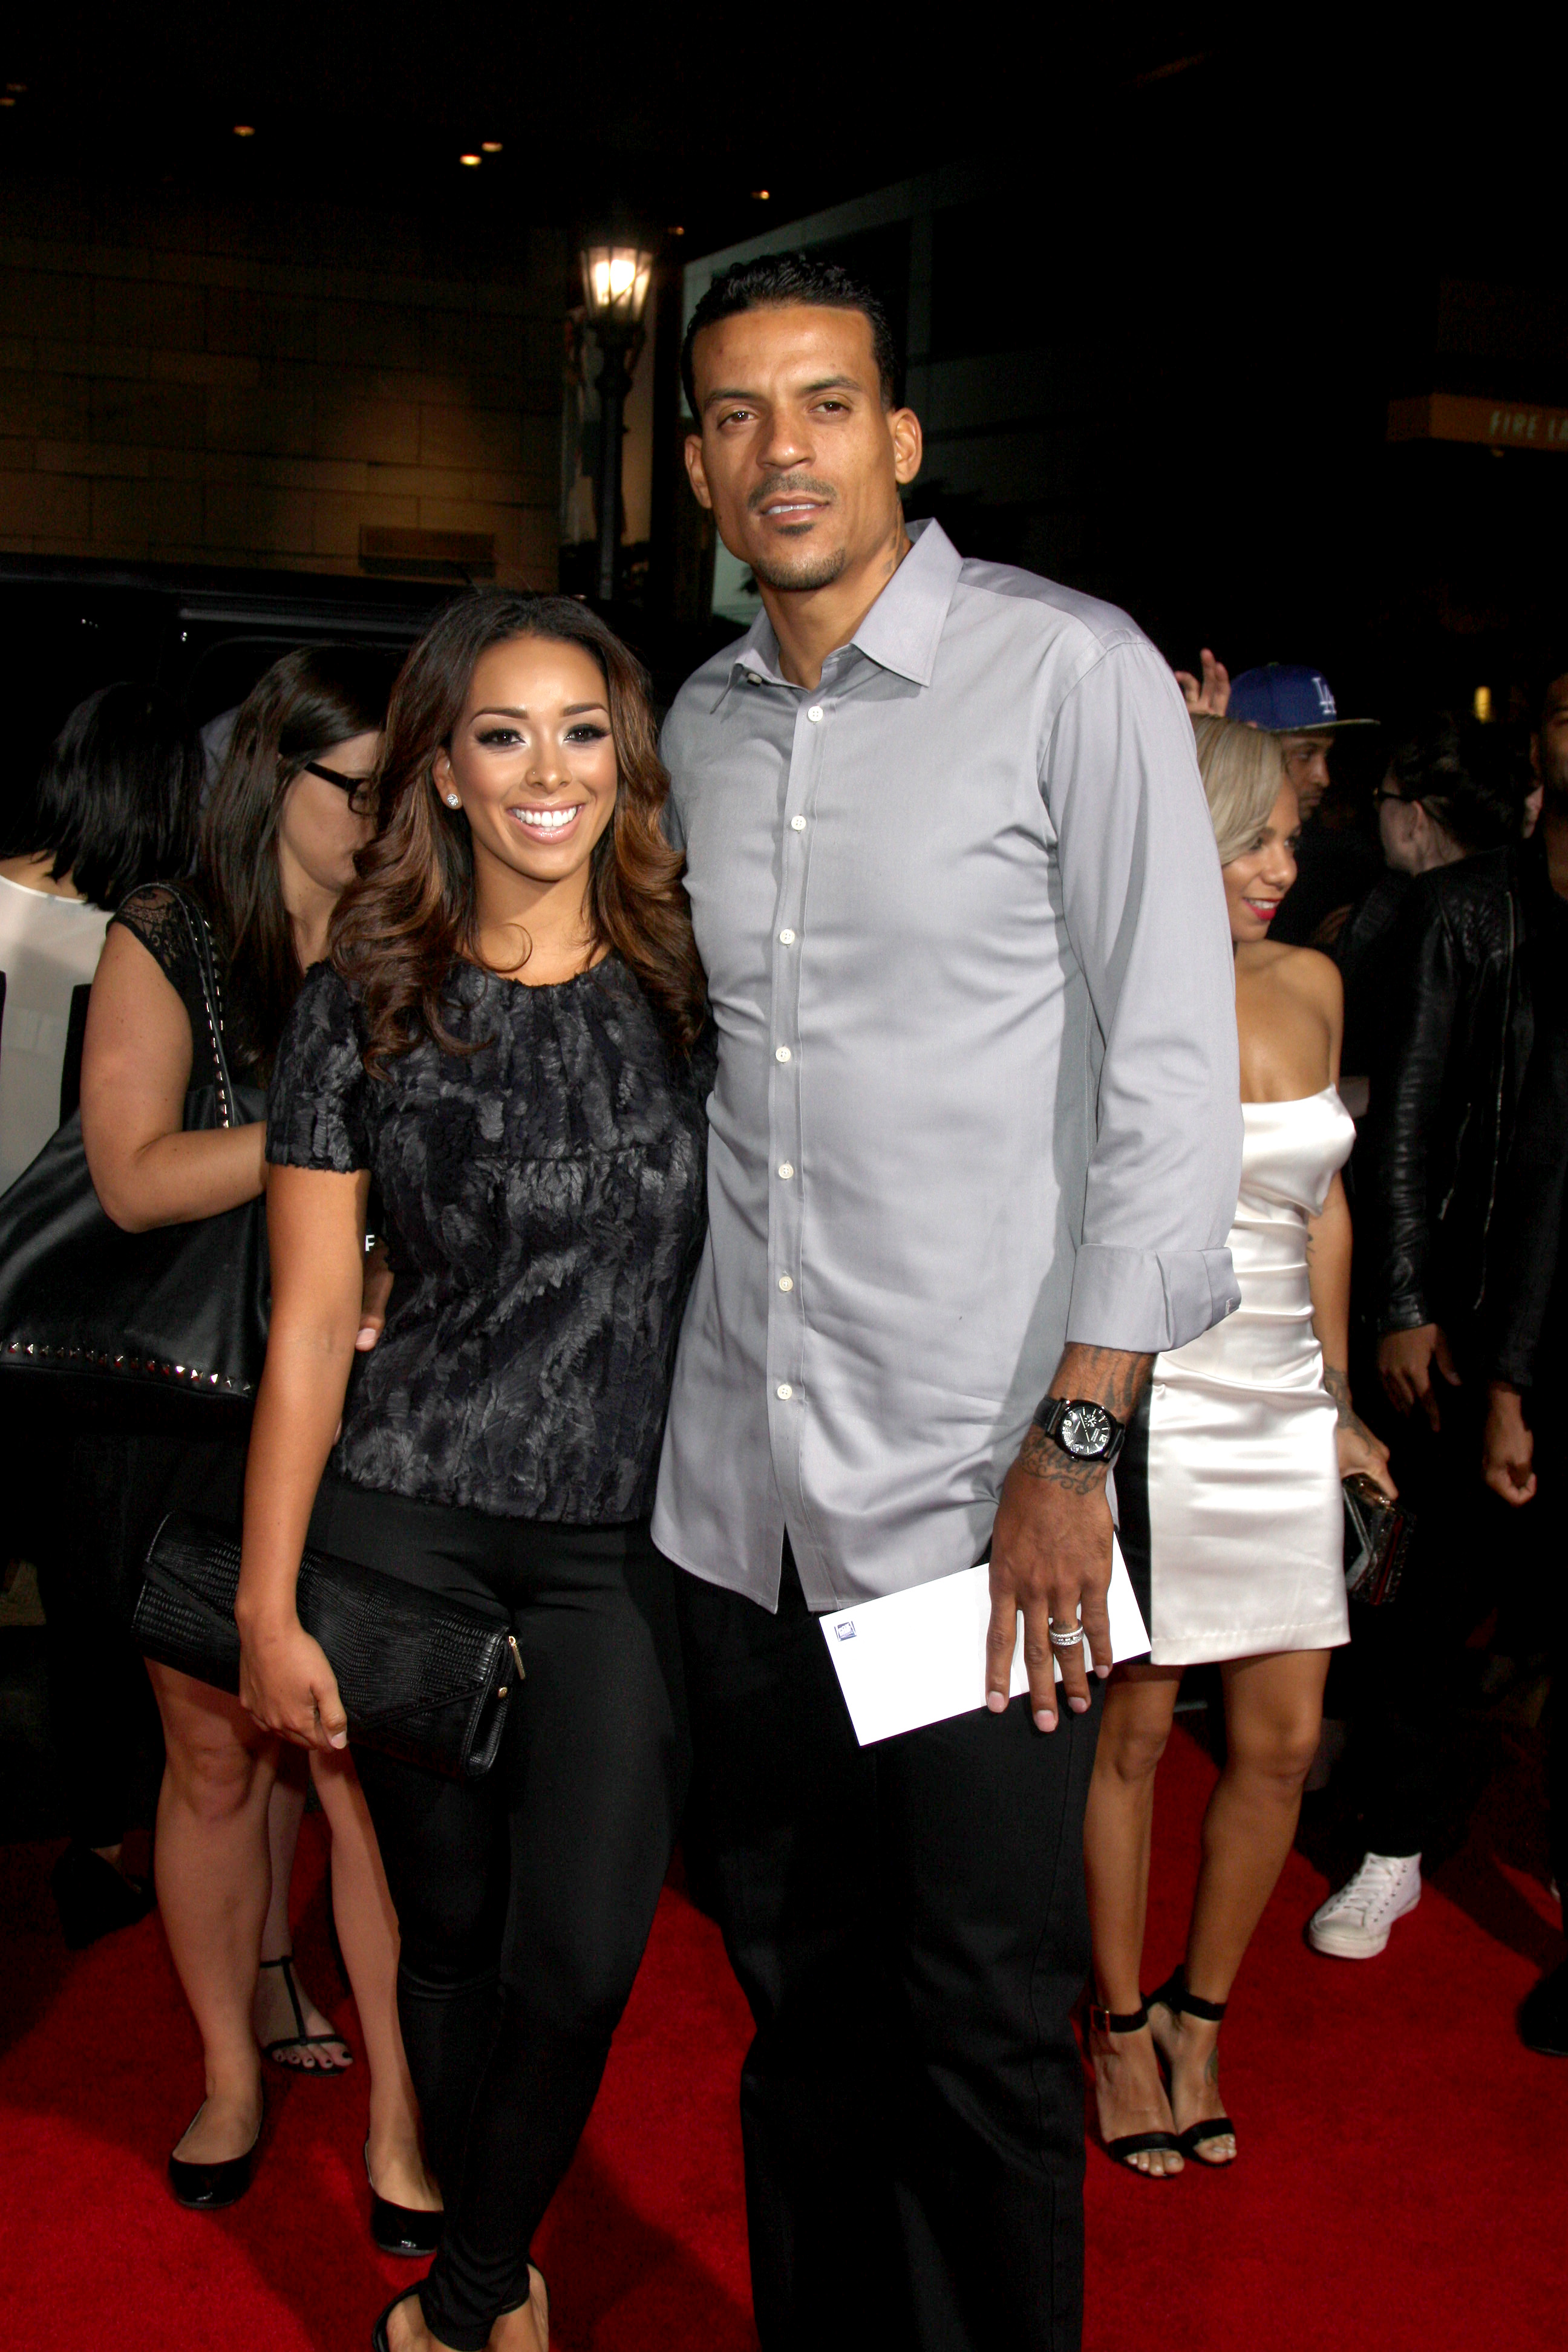 Who is Matt Barnes' fiancee, Anansa Sims? All you need to know